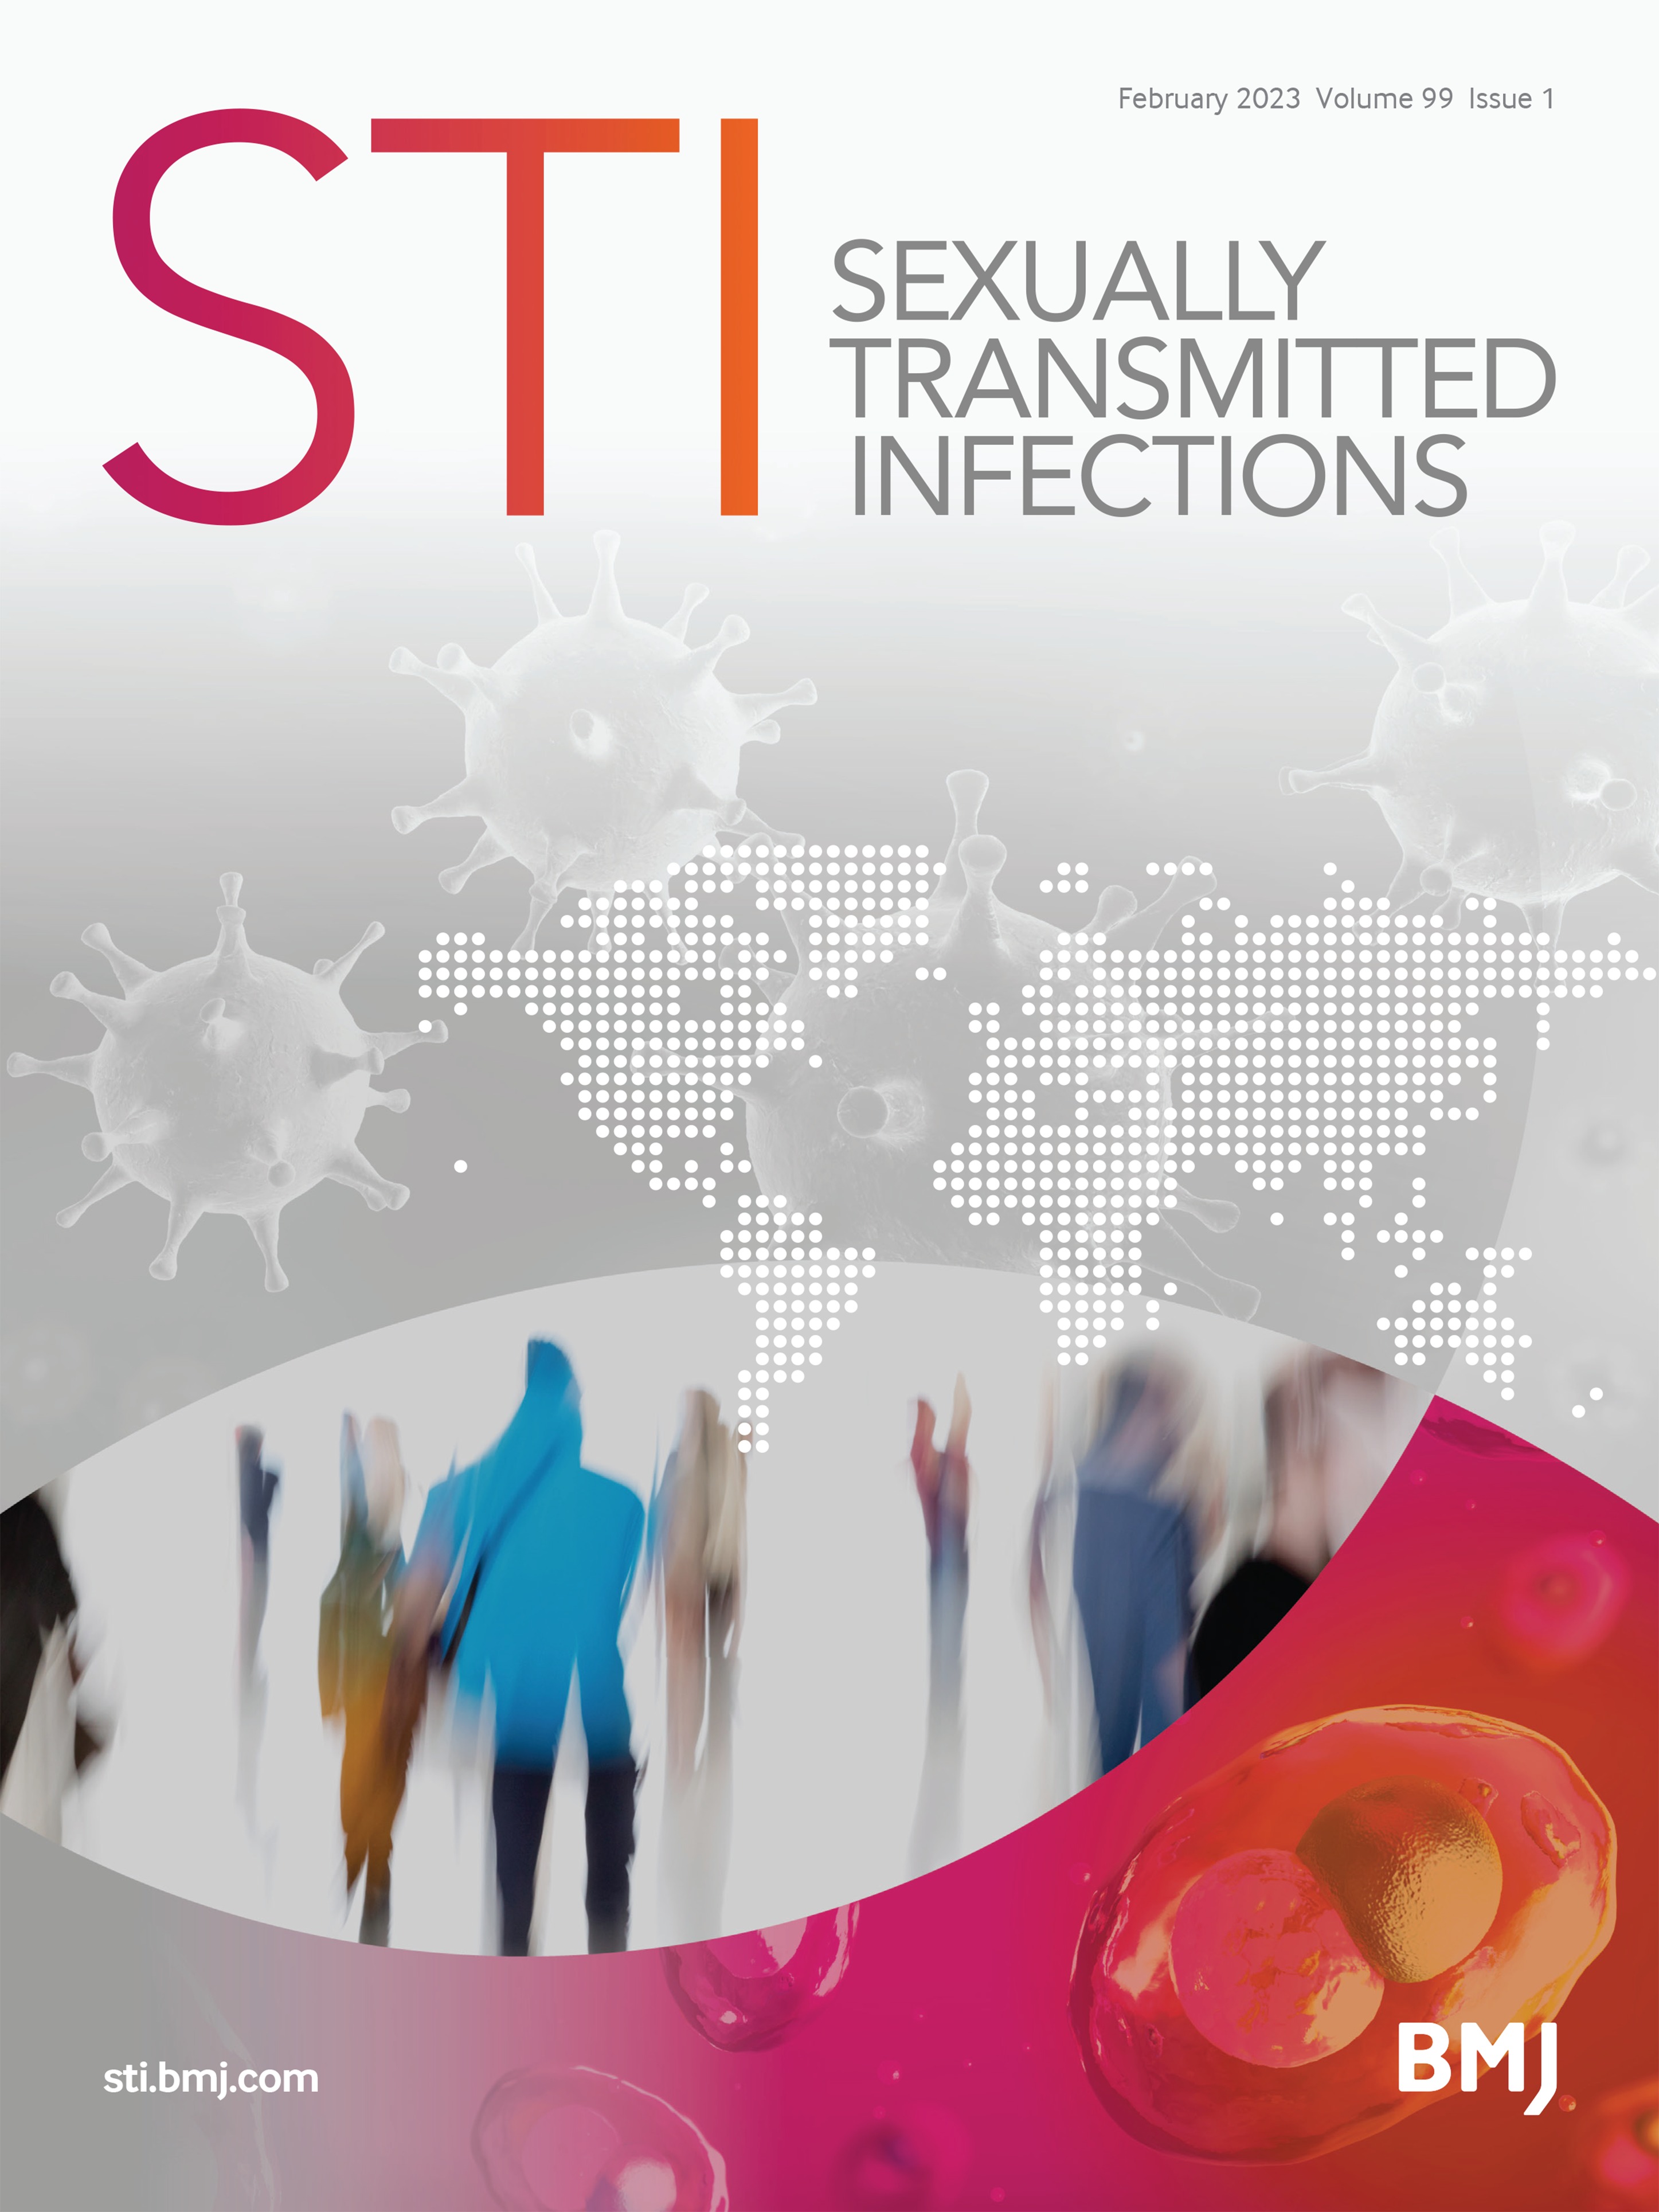 Factors associated with sexually transmitted shigella in men who have sex with men: a systematic review